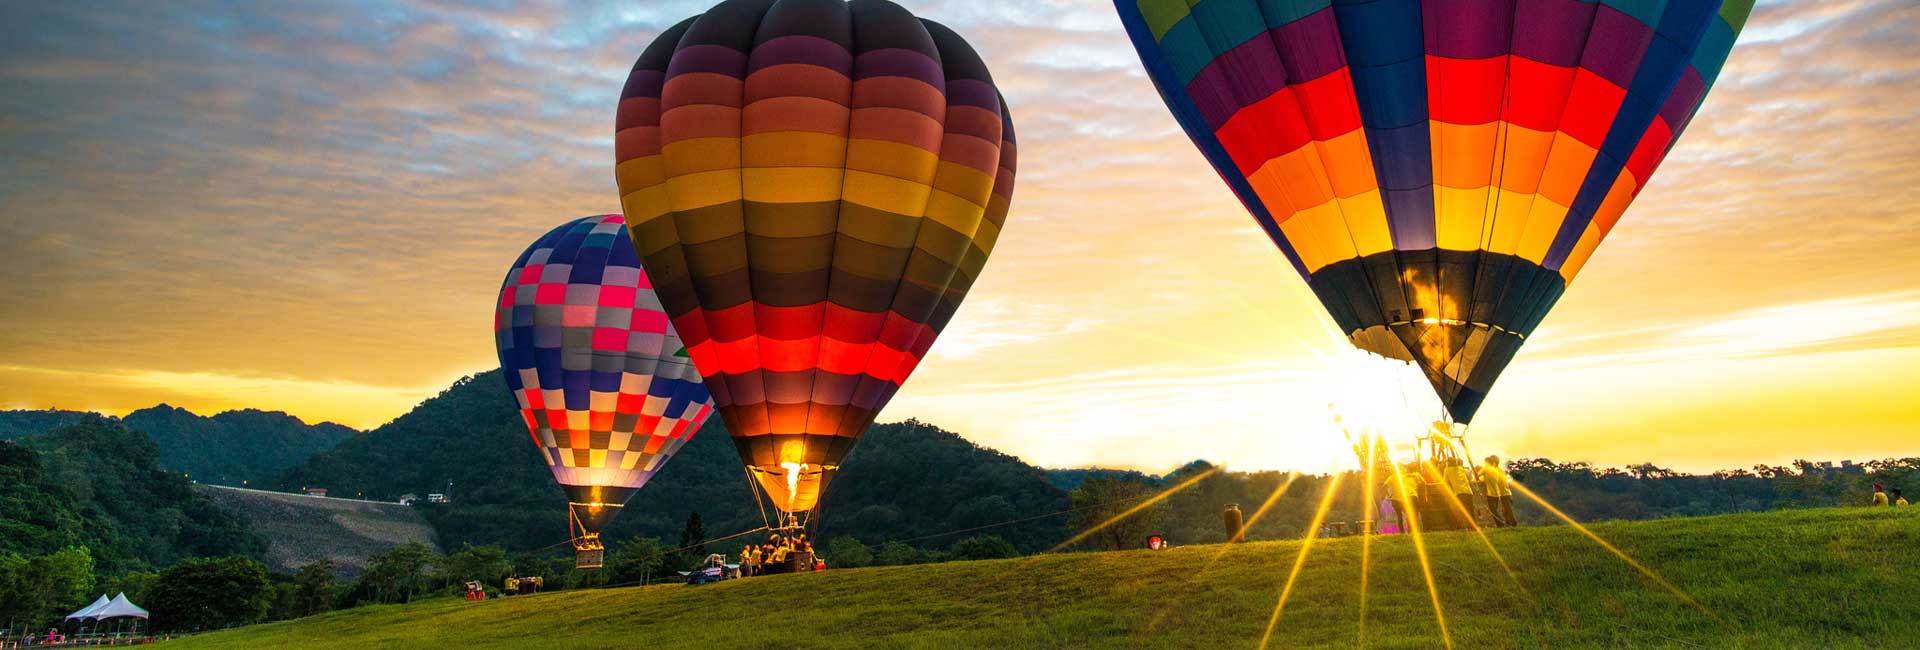 Hot air balloons floating across Washington State landscape